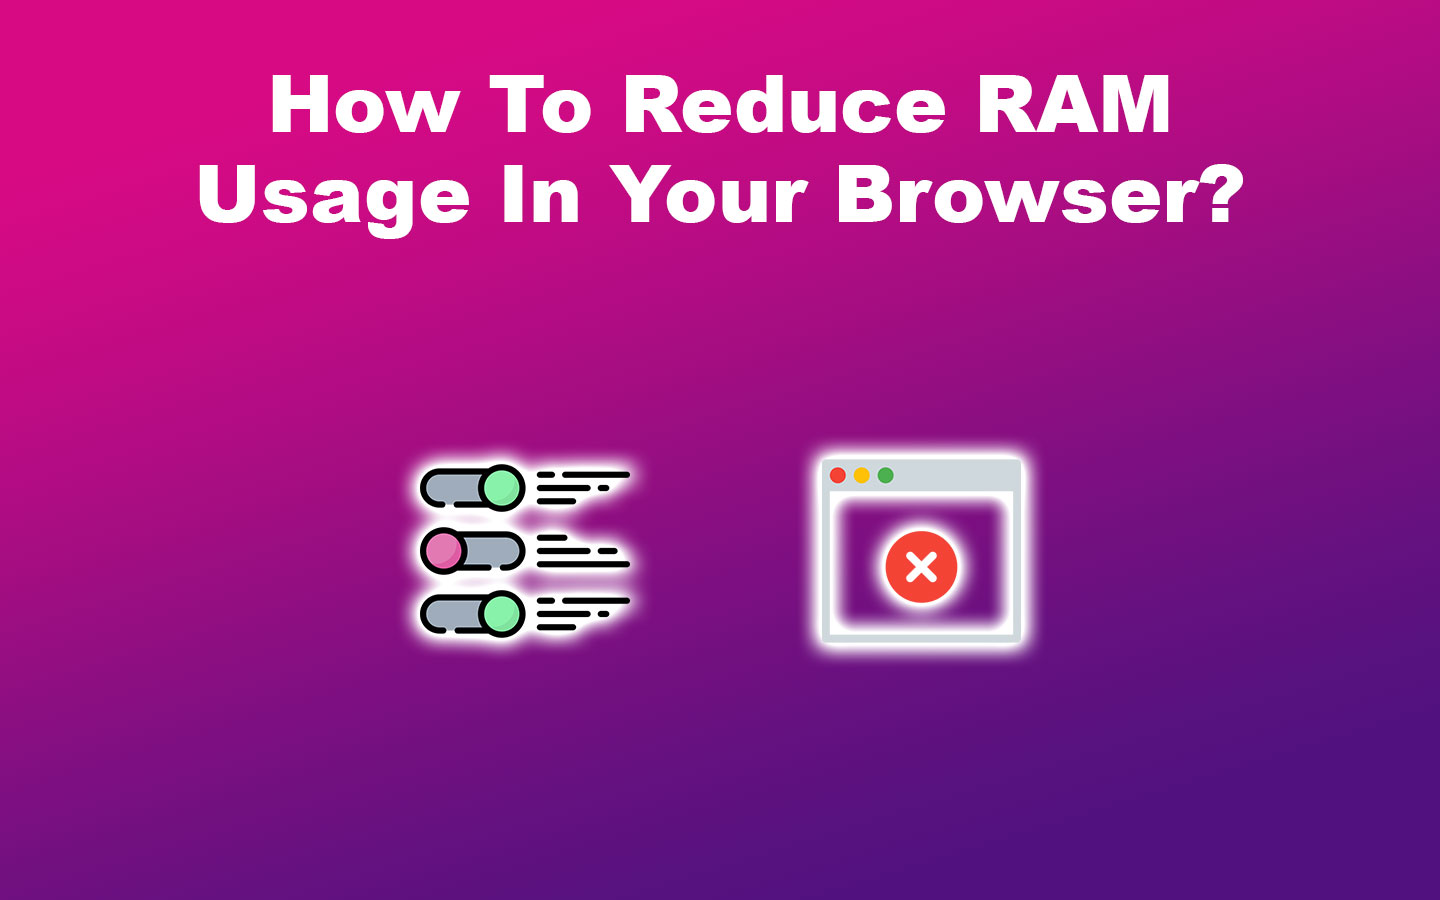 How To Reduce RAM Usage In Your Browser